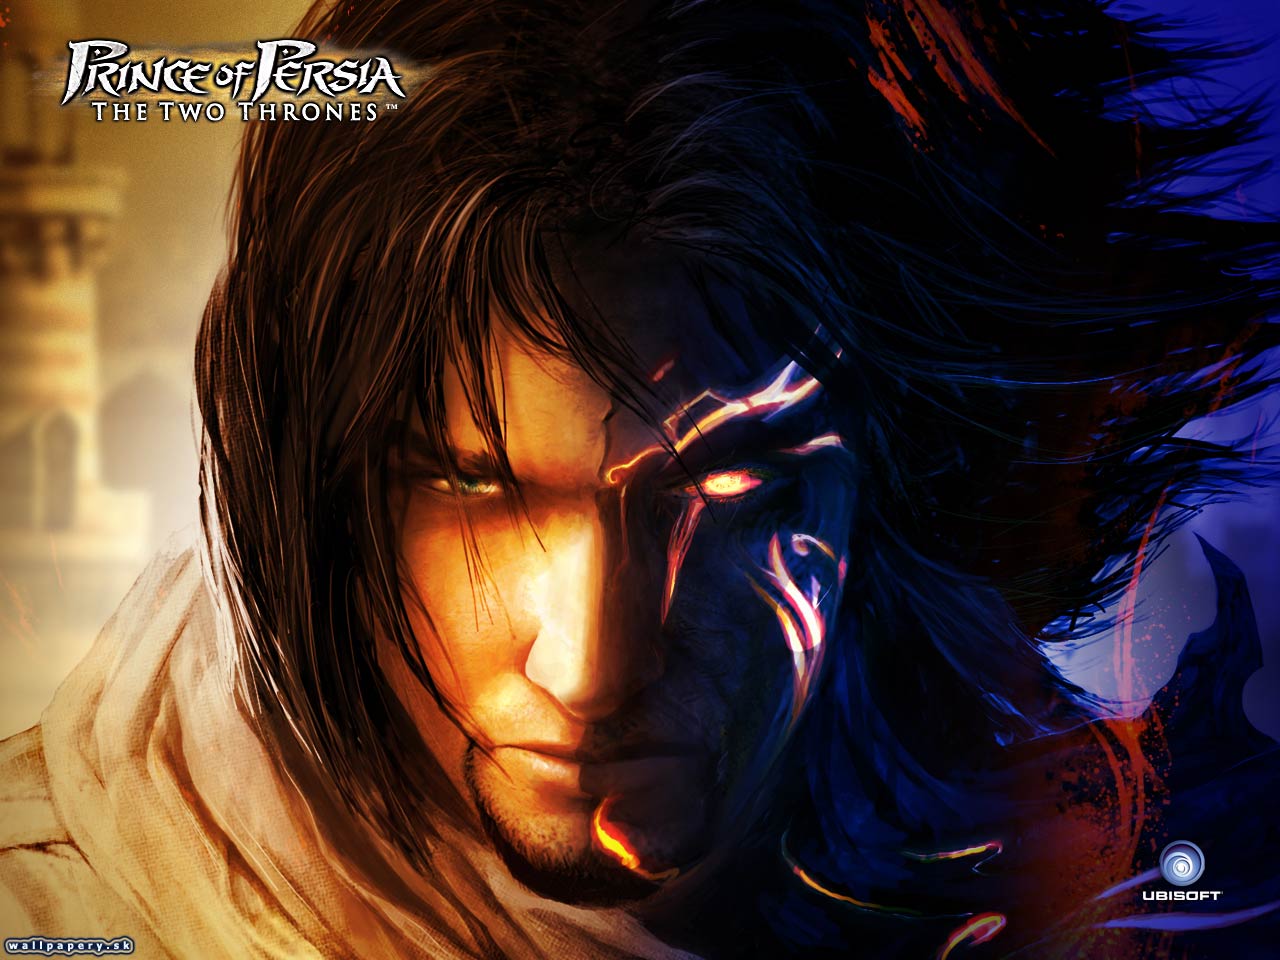 Prince of Persia: The Two Thrones - wallpaper 2